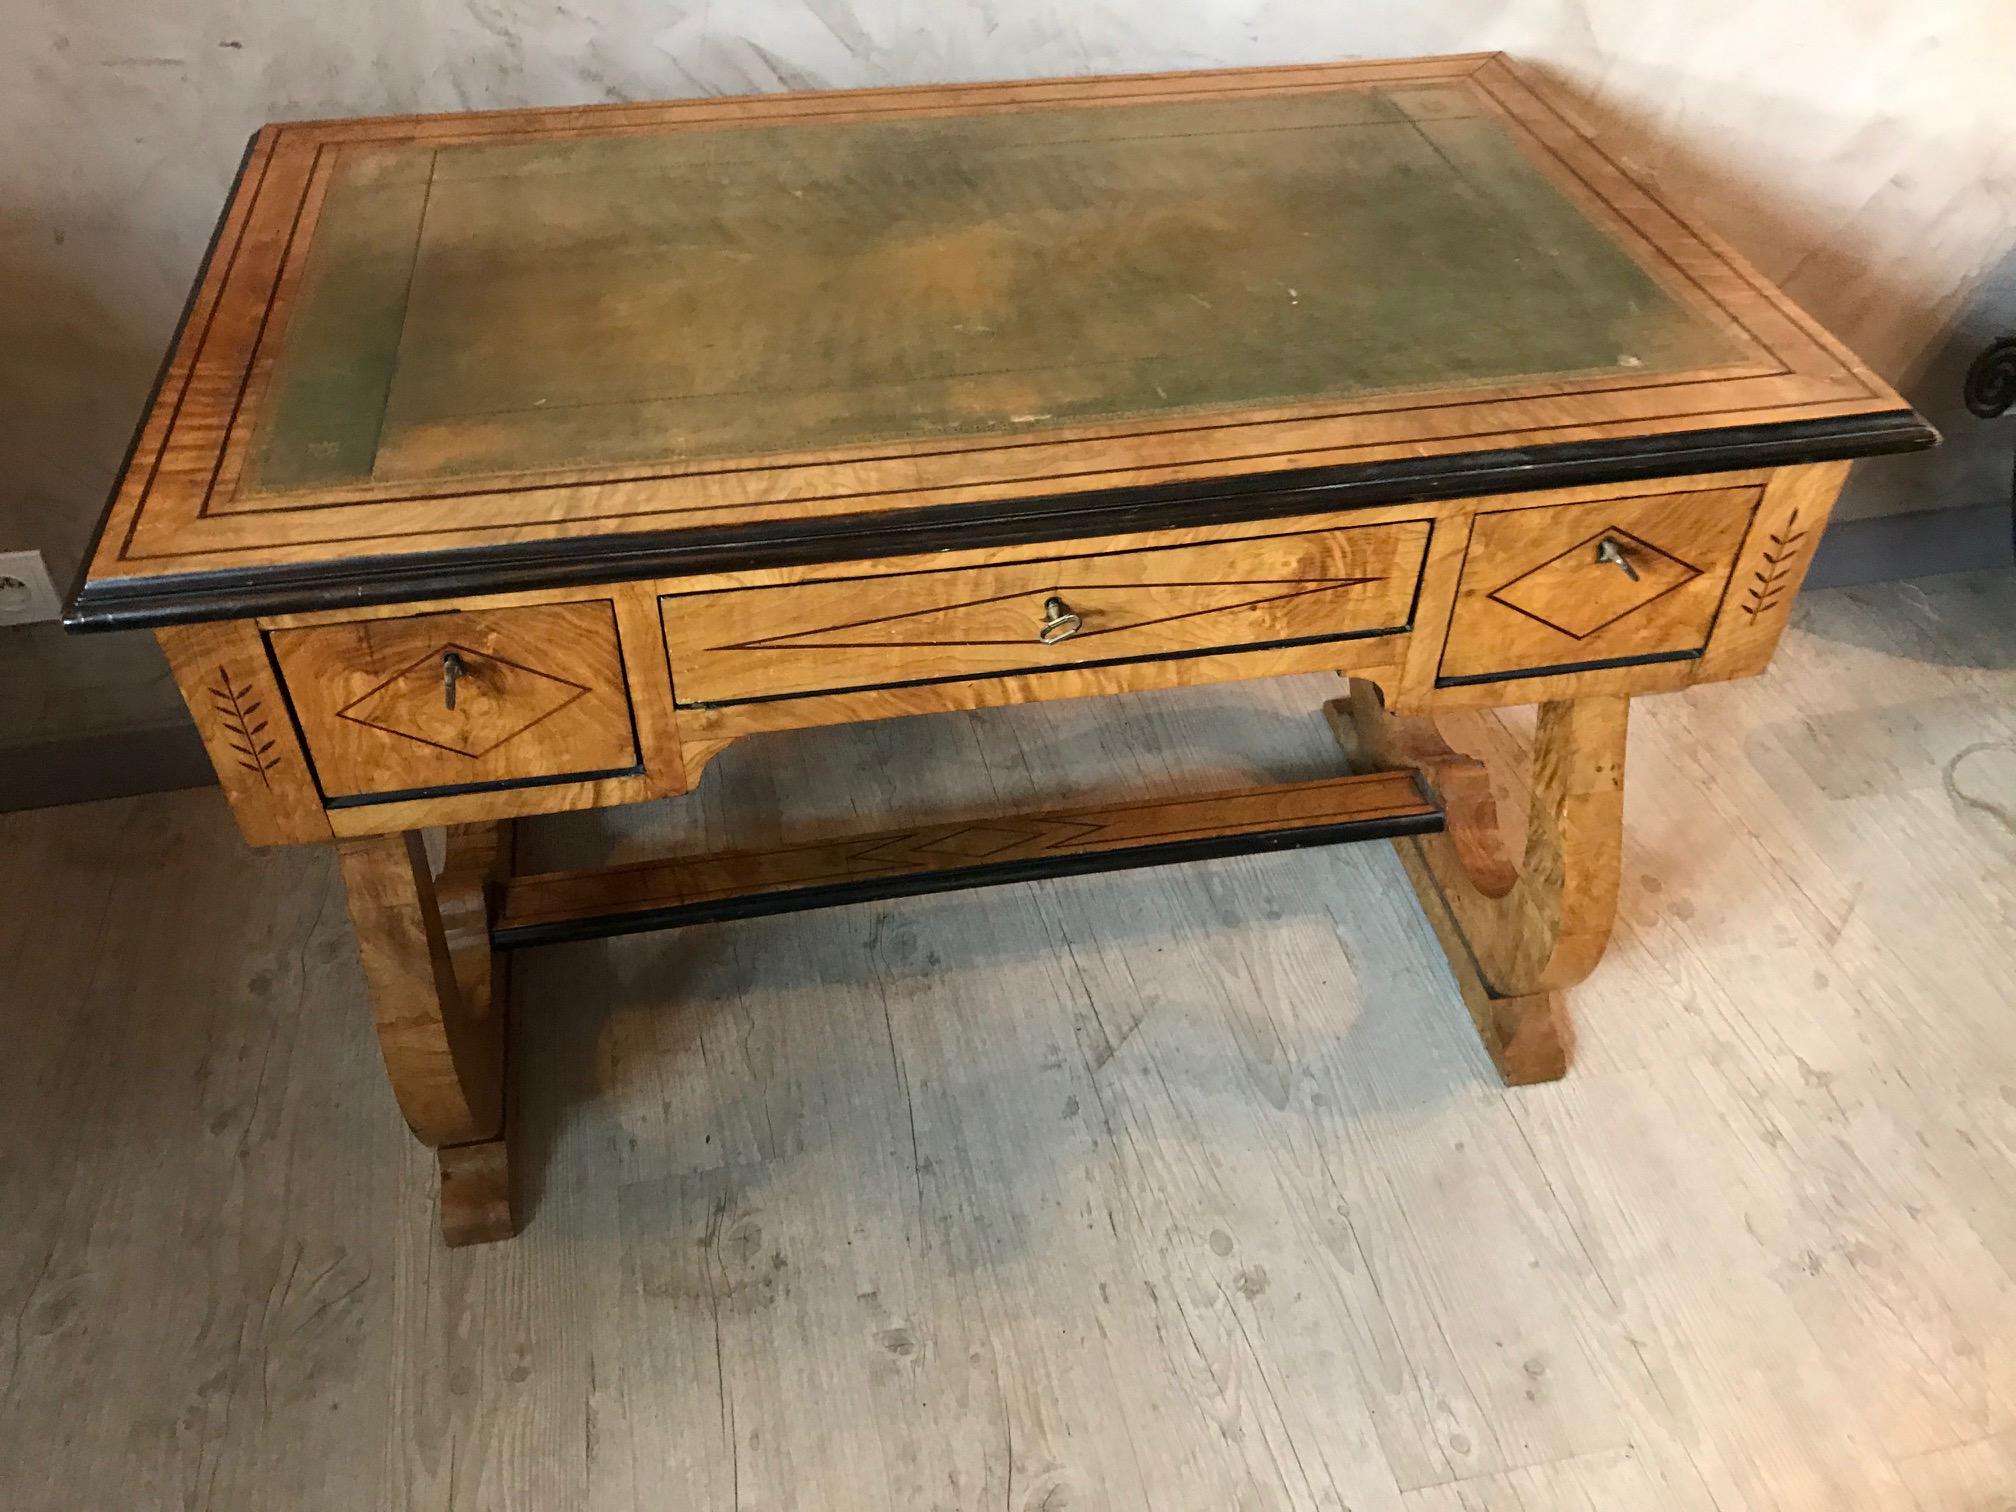 Beautiful and rare French desk made with Sycamore veneer, Charles X style. The top of the desk is made with a green leather that shows fading with use.
Three large and depth drawers with a dovetail drawer construction, with their original